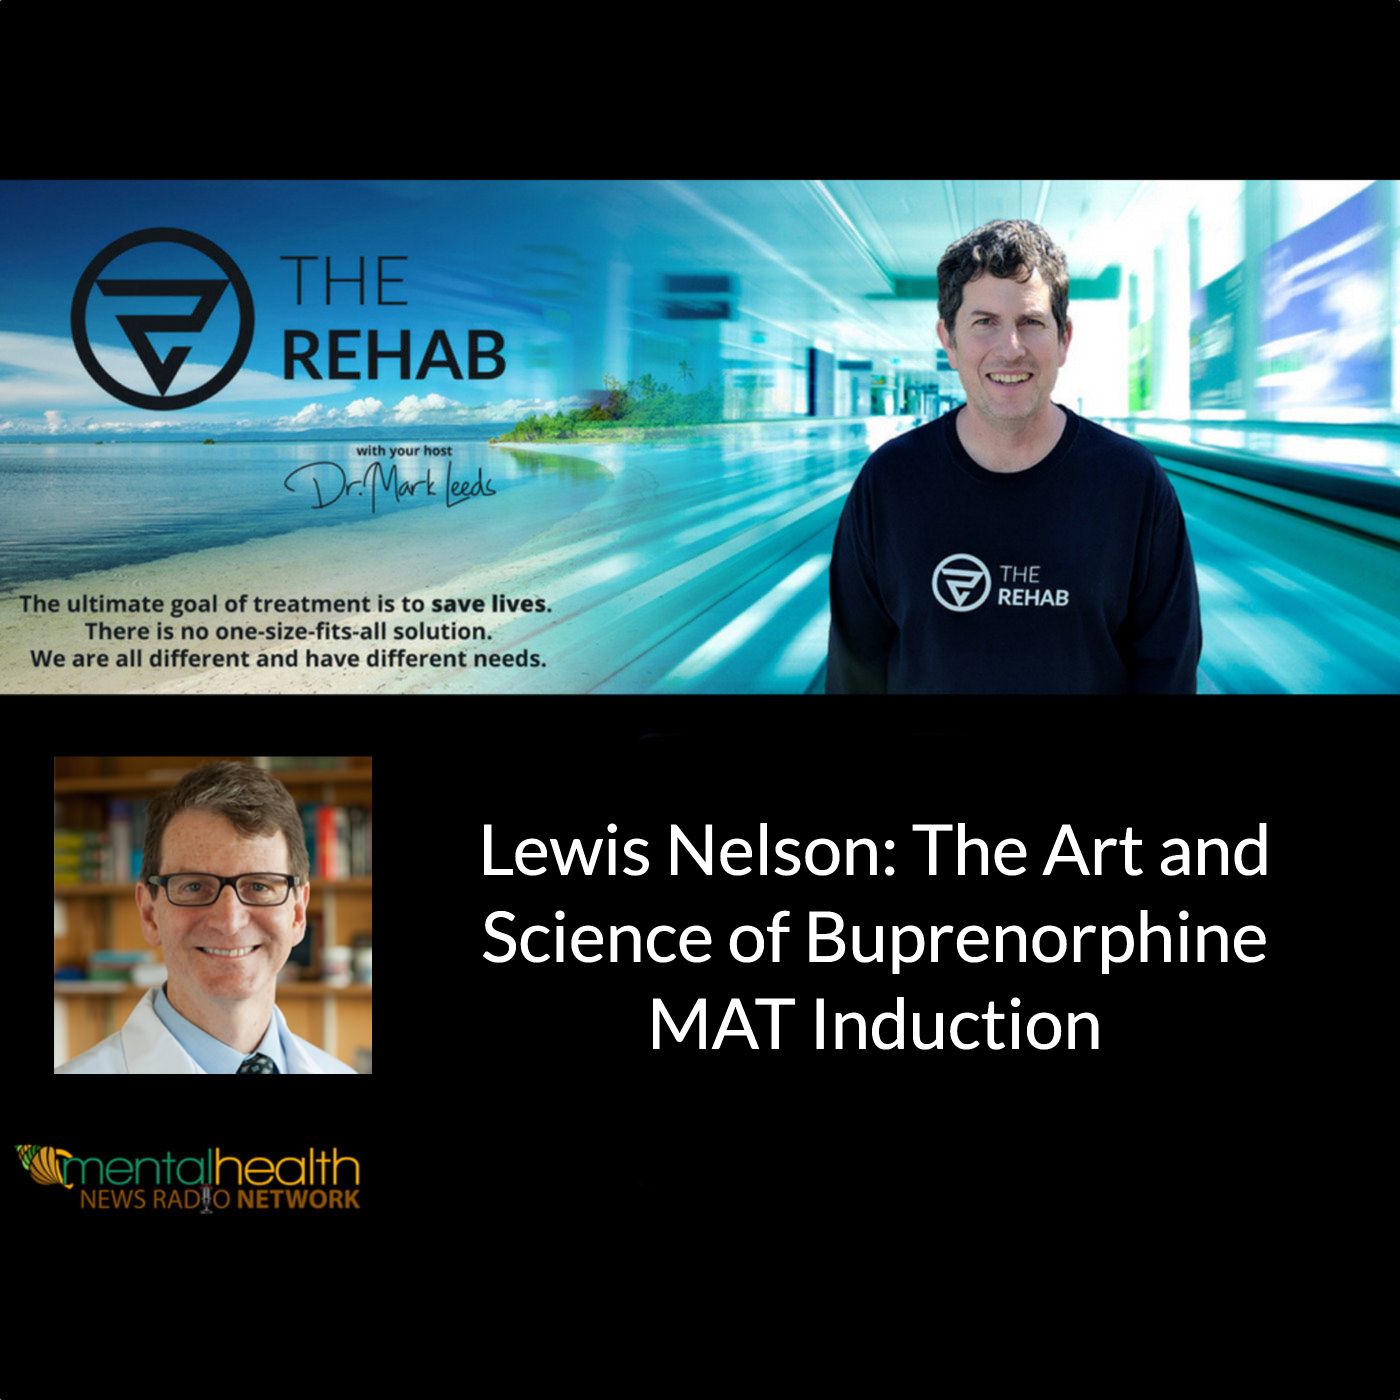 Lewis Nelson: The Art and Science of Buprenorphine MAT Induction